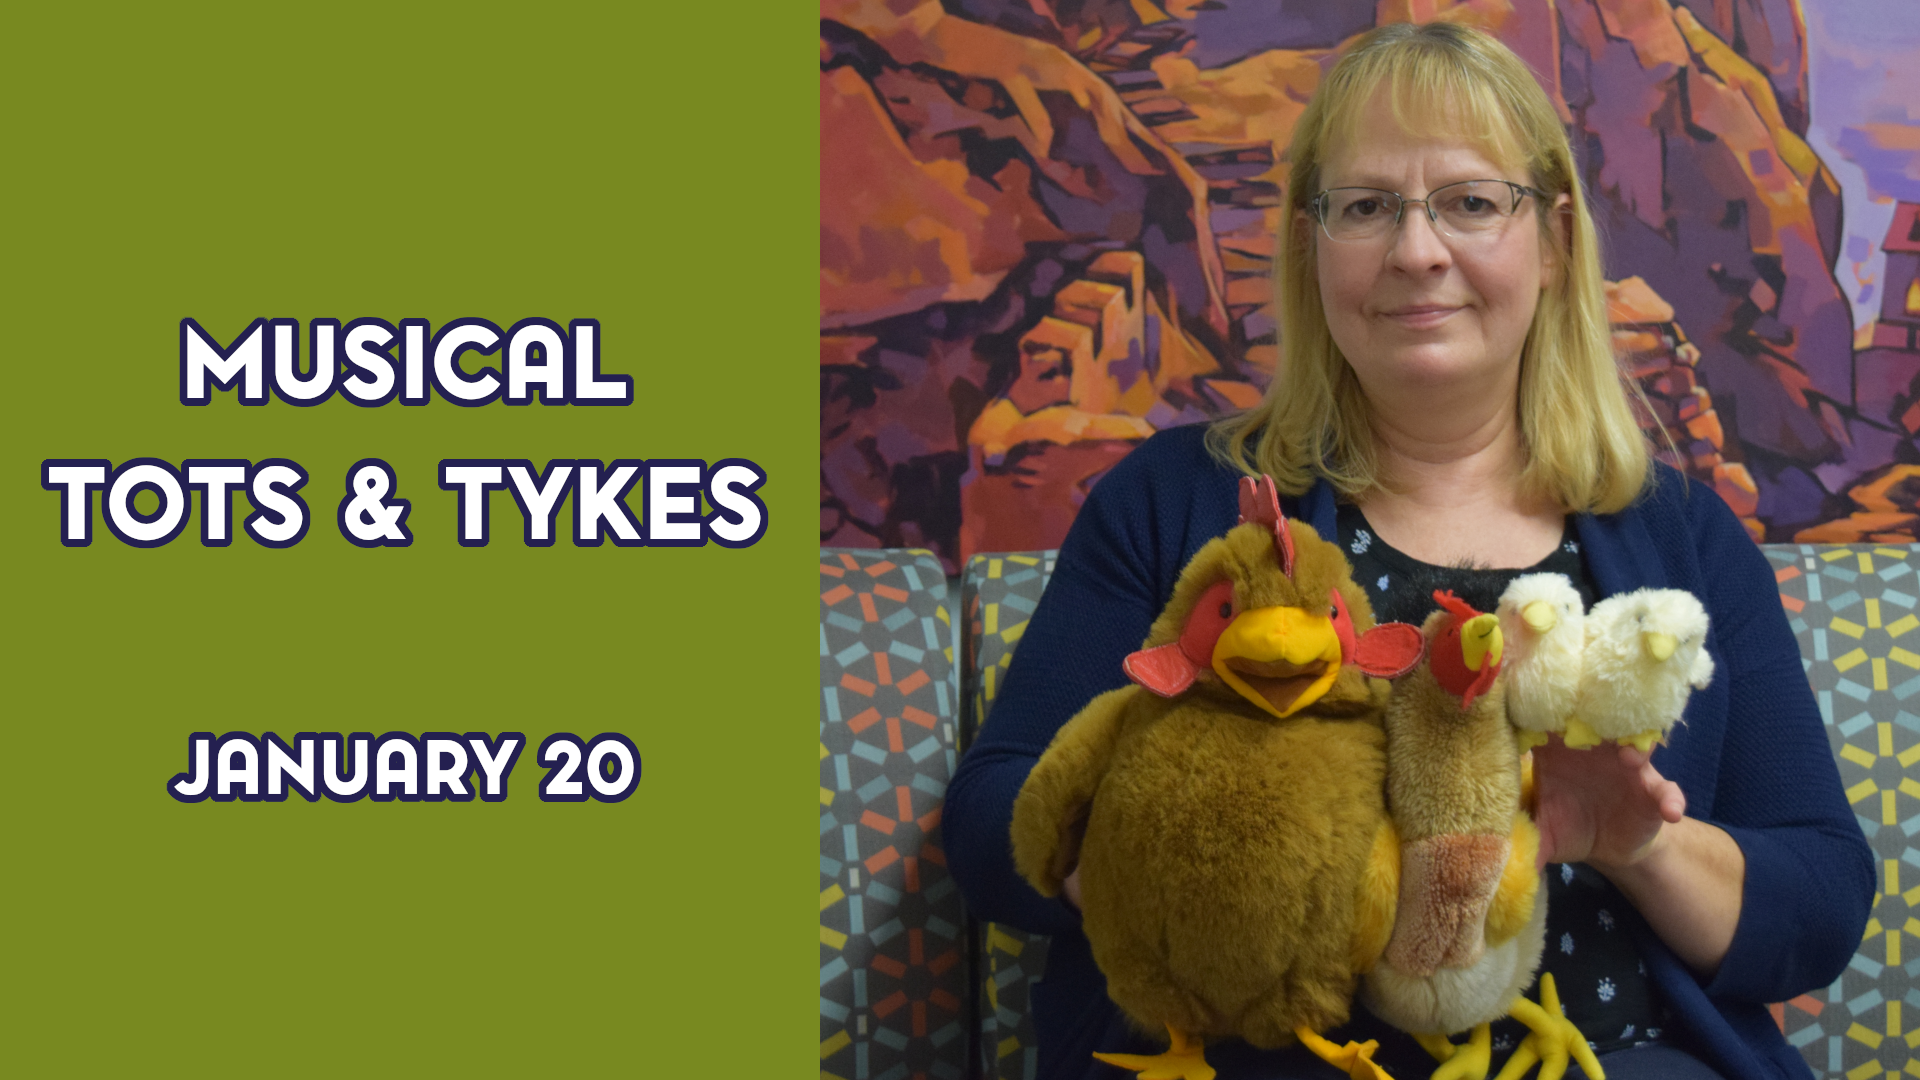 A woman holds two puppets, a chicken and a rooster, next to the text "Musical Tots & Tykes January 20"